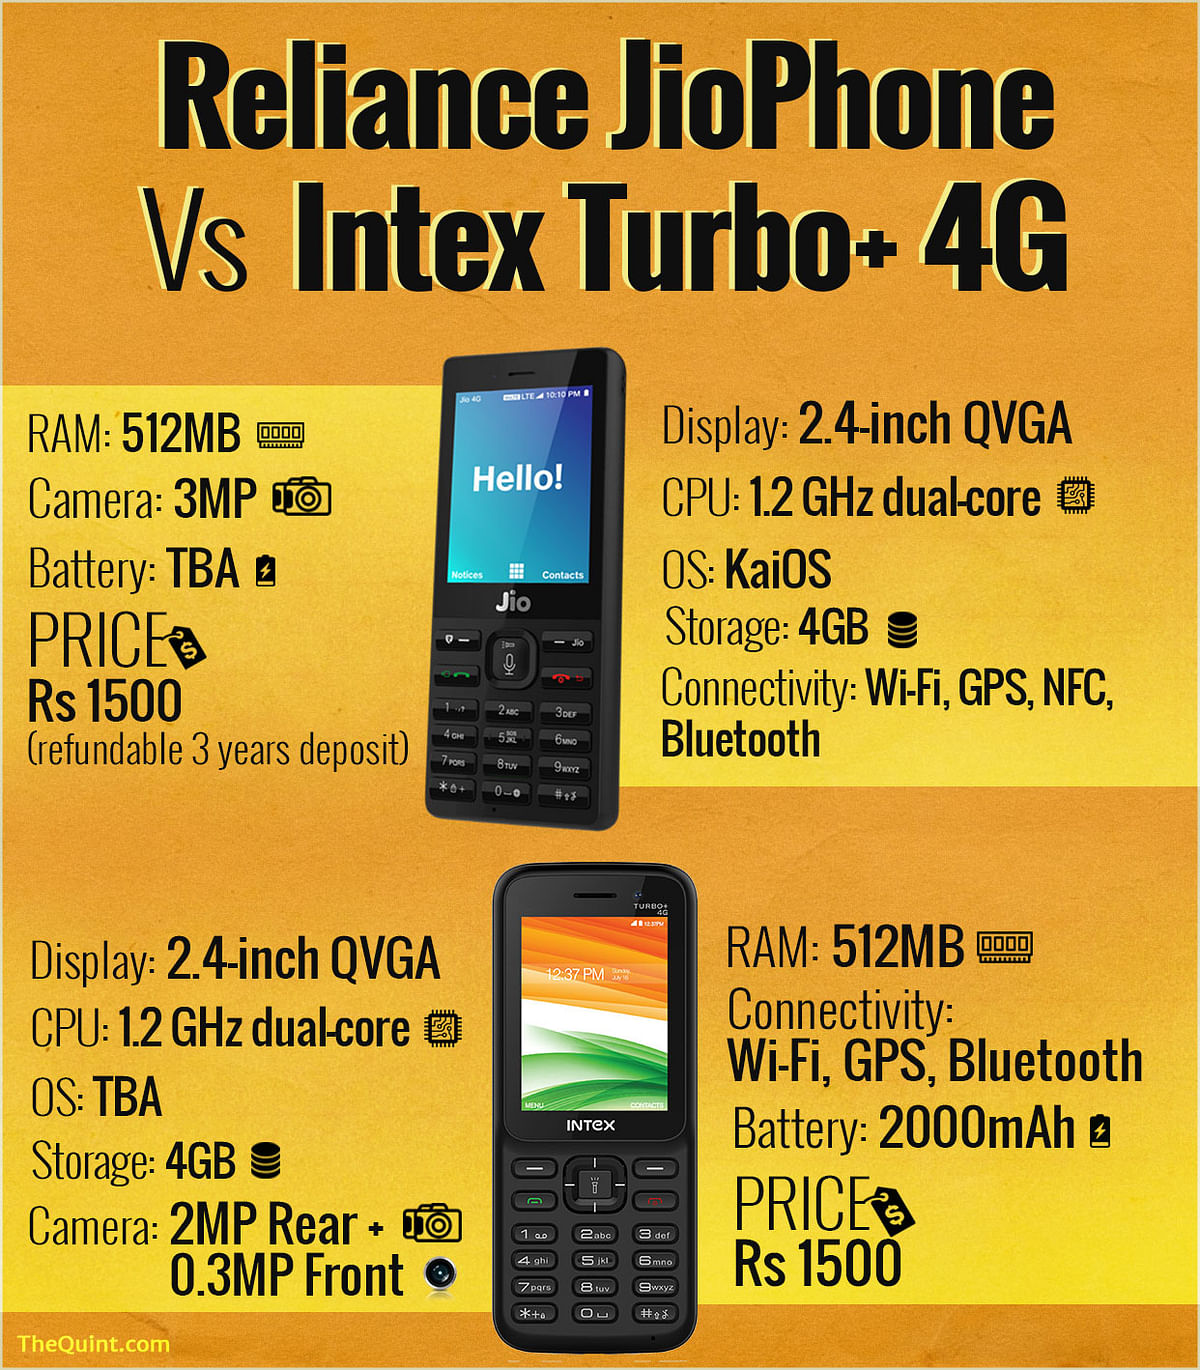 A comparison between the JioPhone and the latest entrant in the 4G feature phone market the Intex Turbo+ 4G